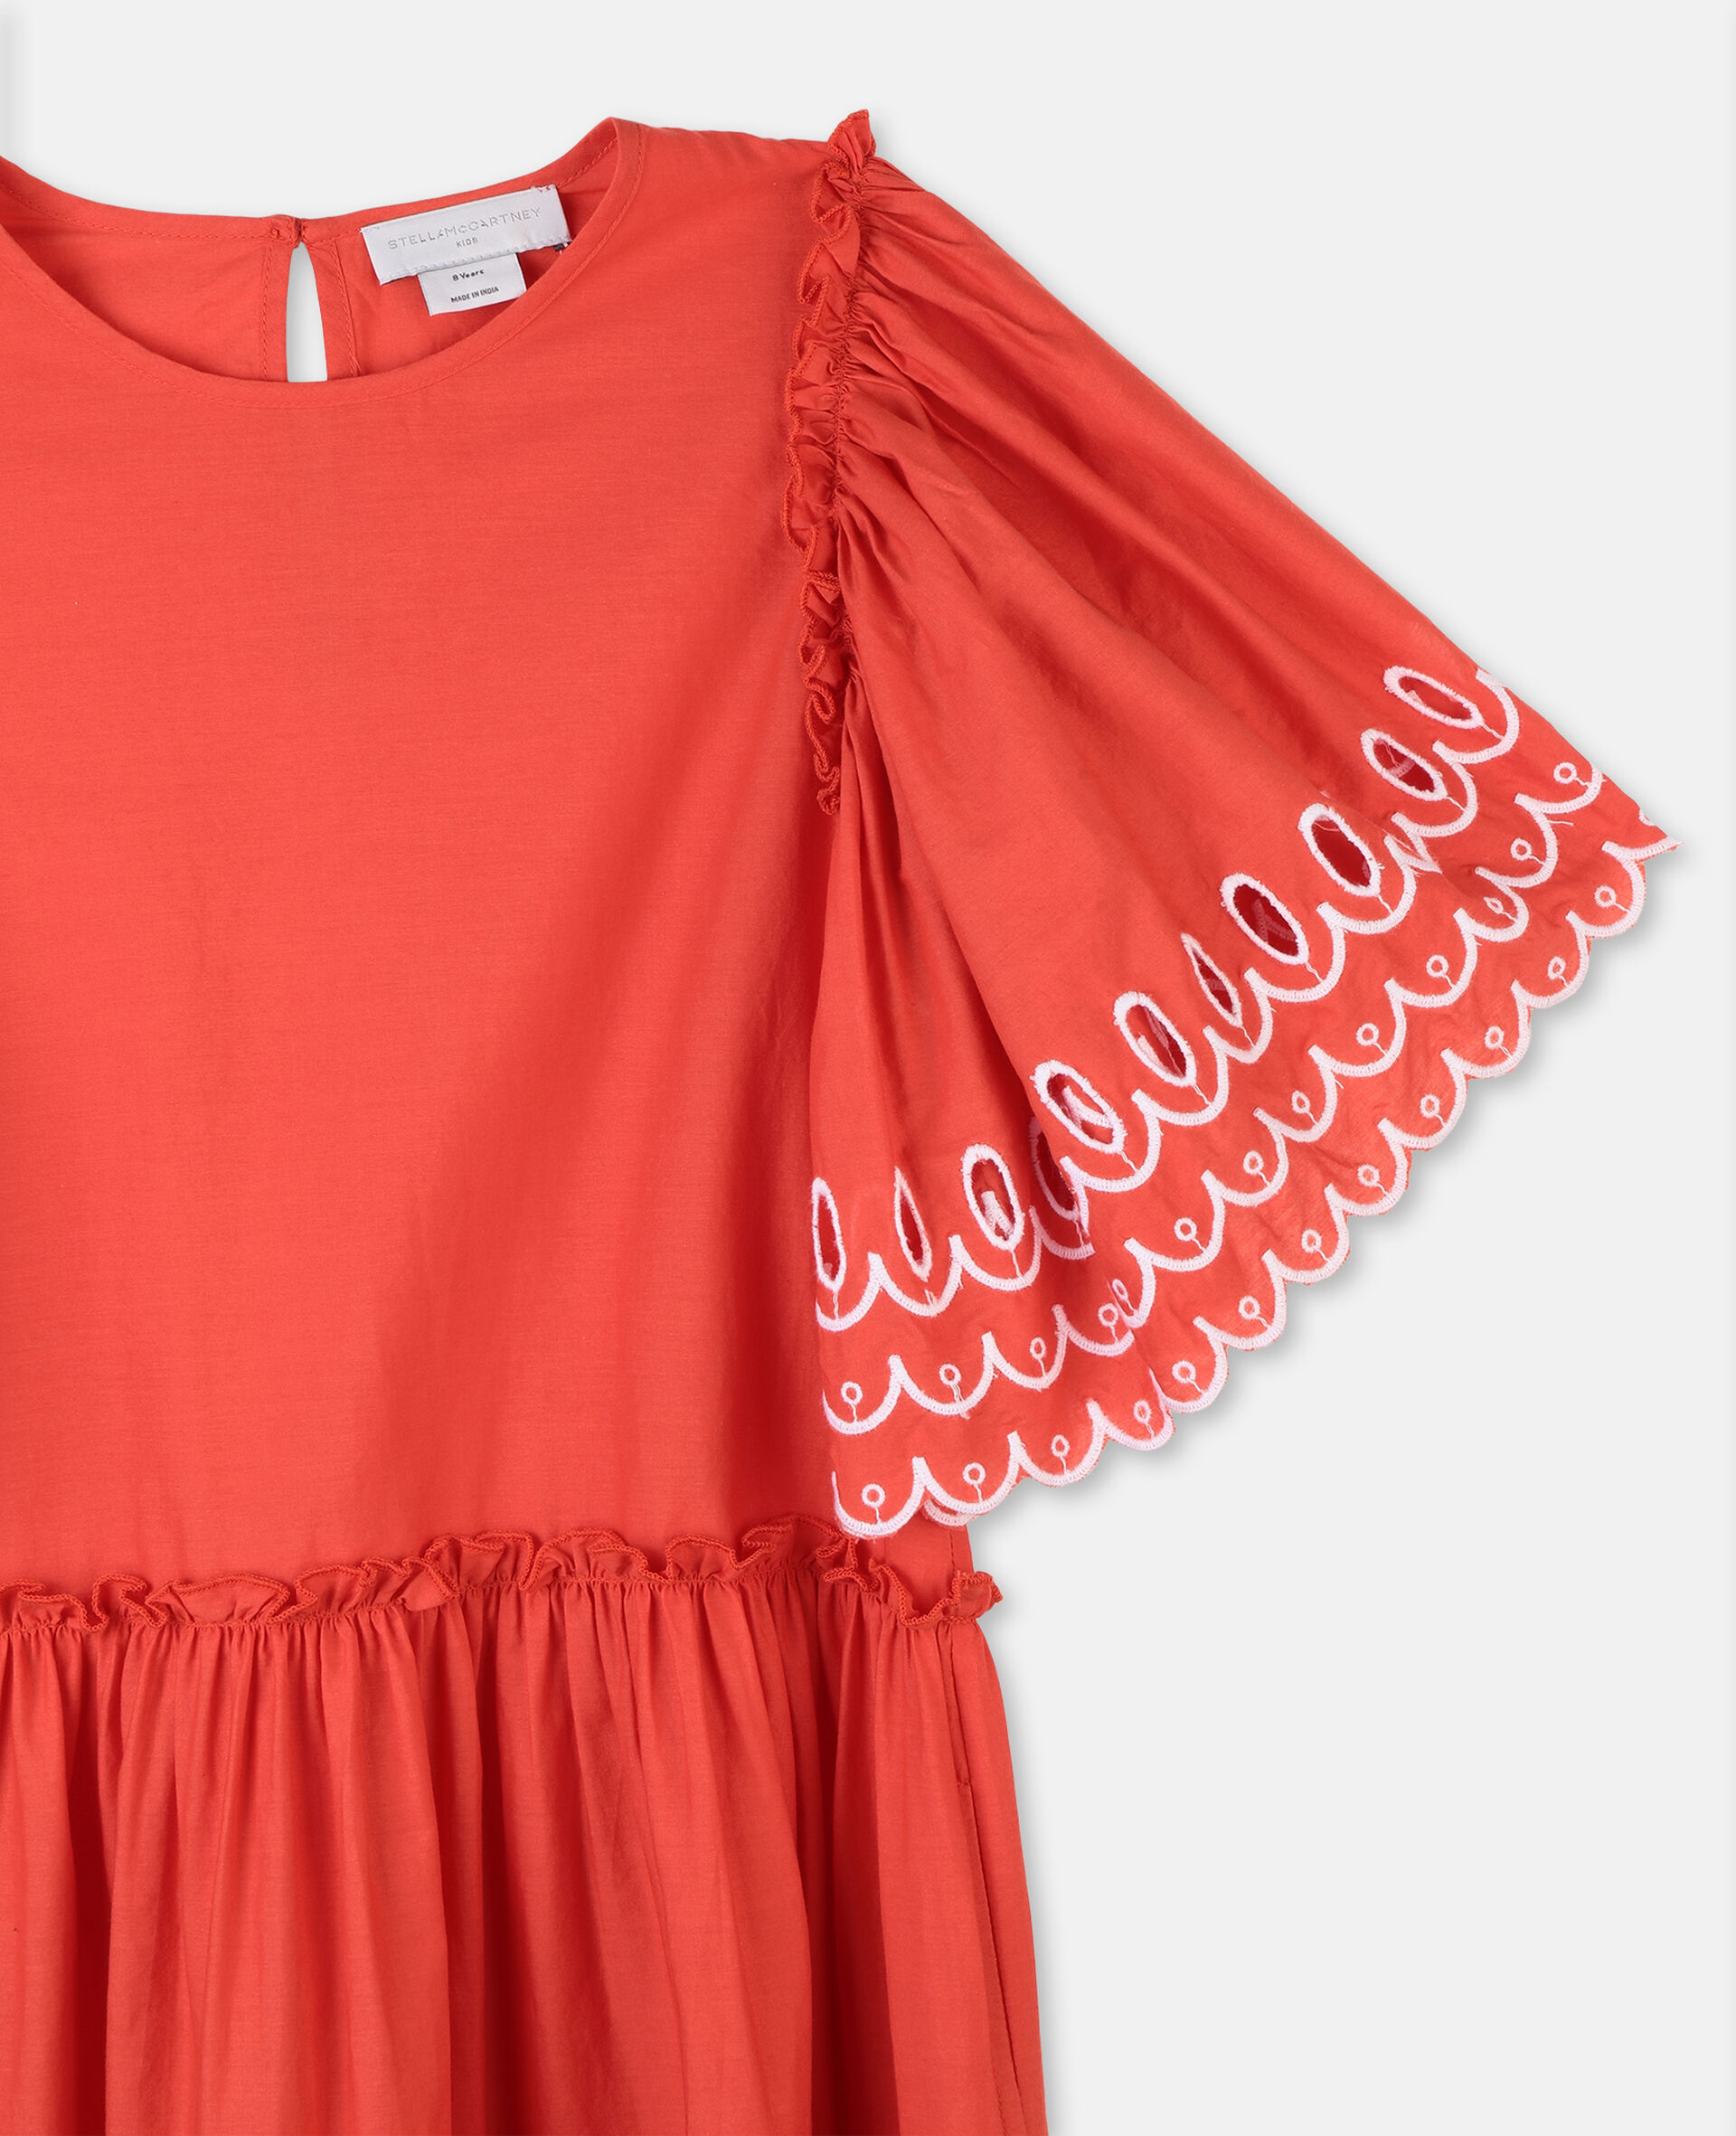 Scalloped Cotton Dress-Red-large image number 1